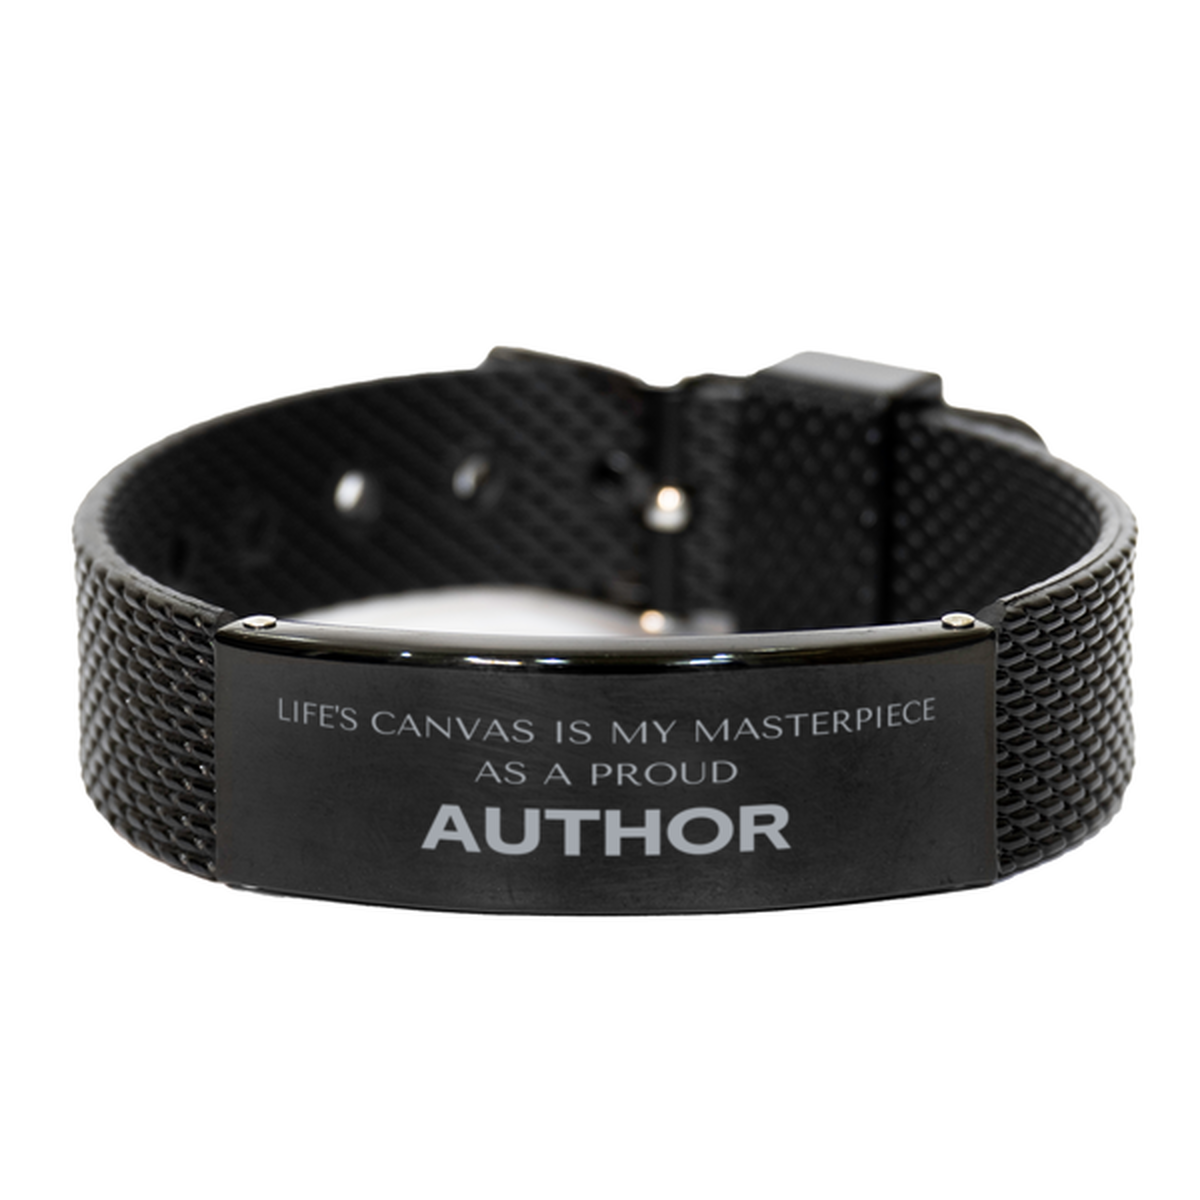 Proud Author Gifts, Life's canvas is my masterpiece, Epic Birthday Christmas Unique Black Shark Mesh Bracelet For Author, Coworkers, Men, Women, Friends